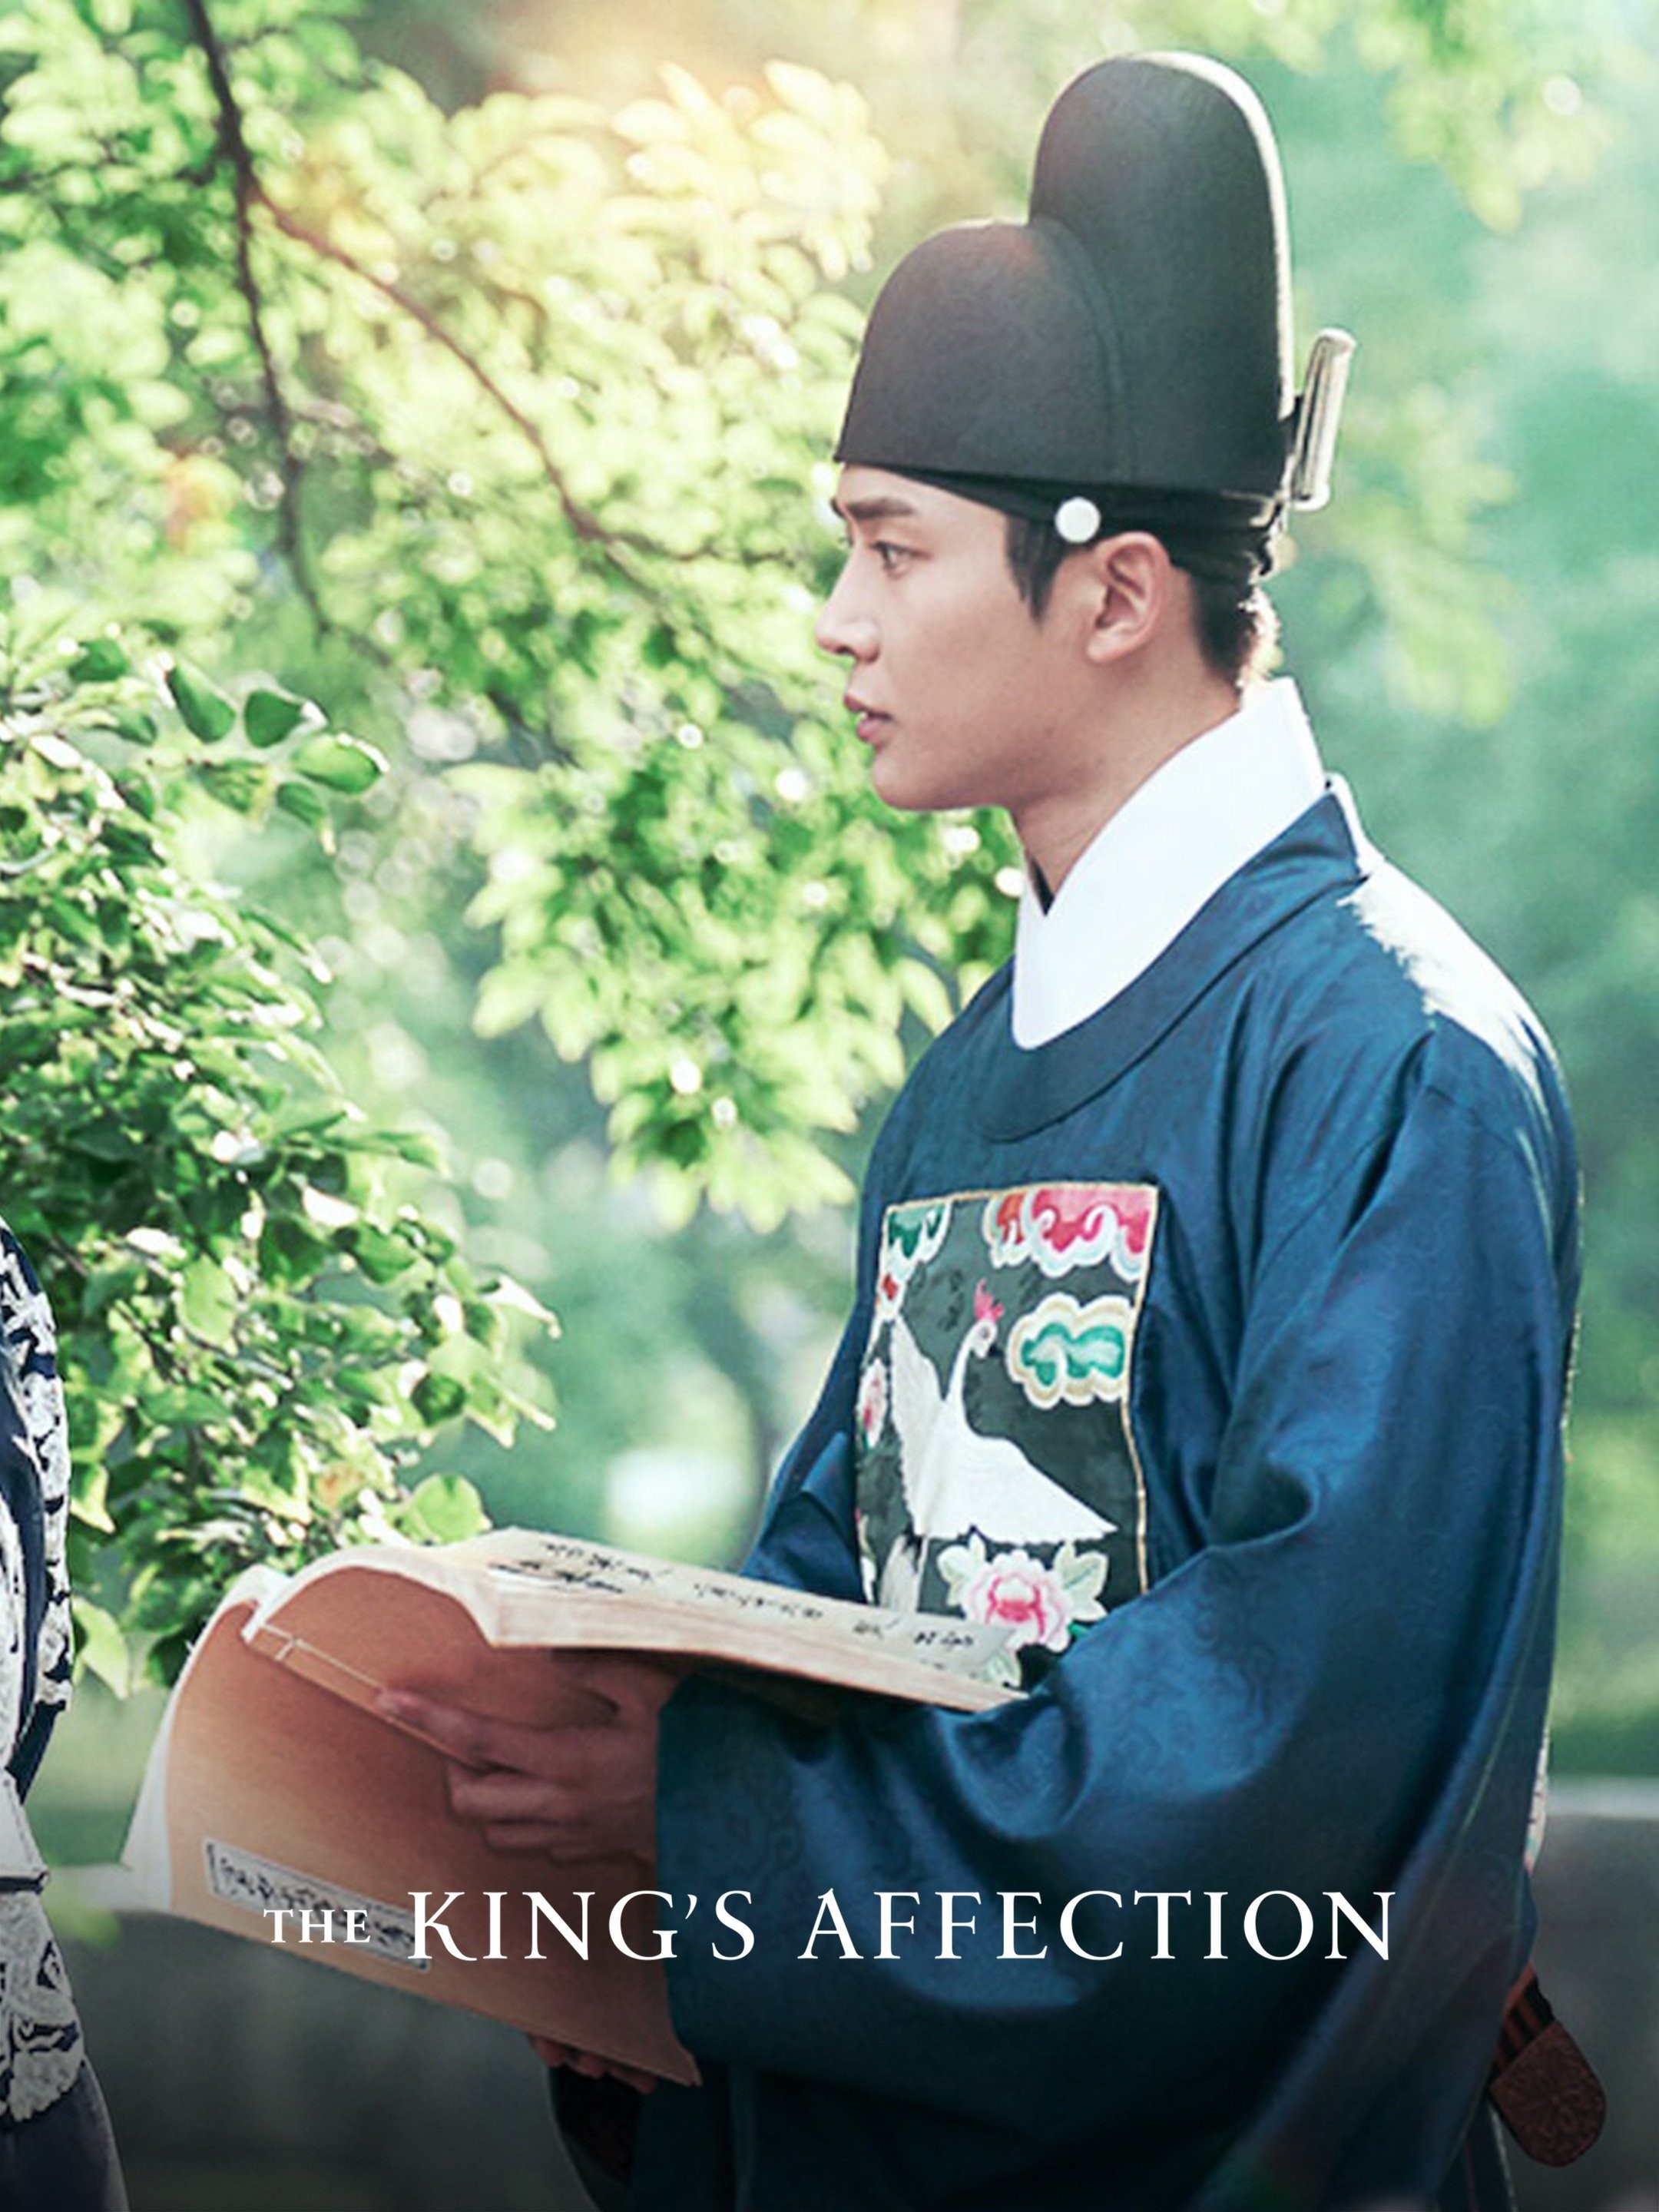 The King's Affection Season 2 Release Date 